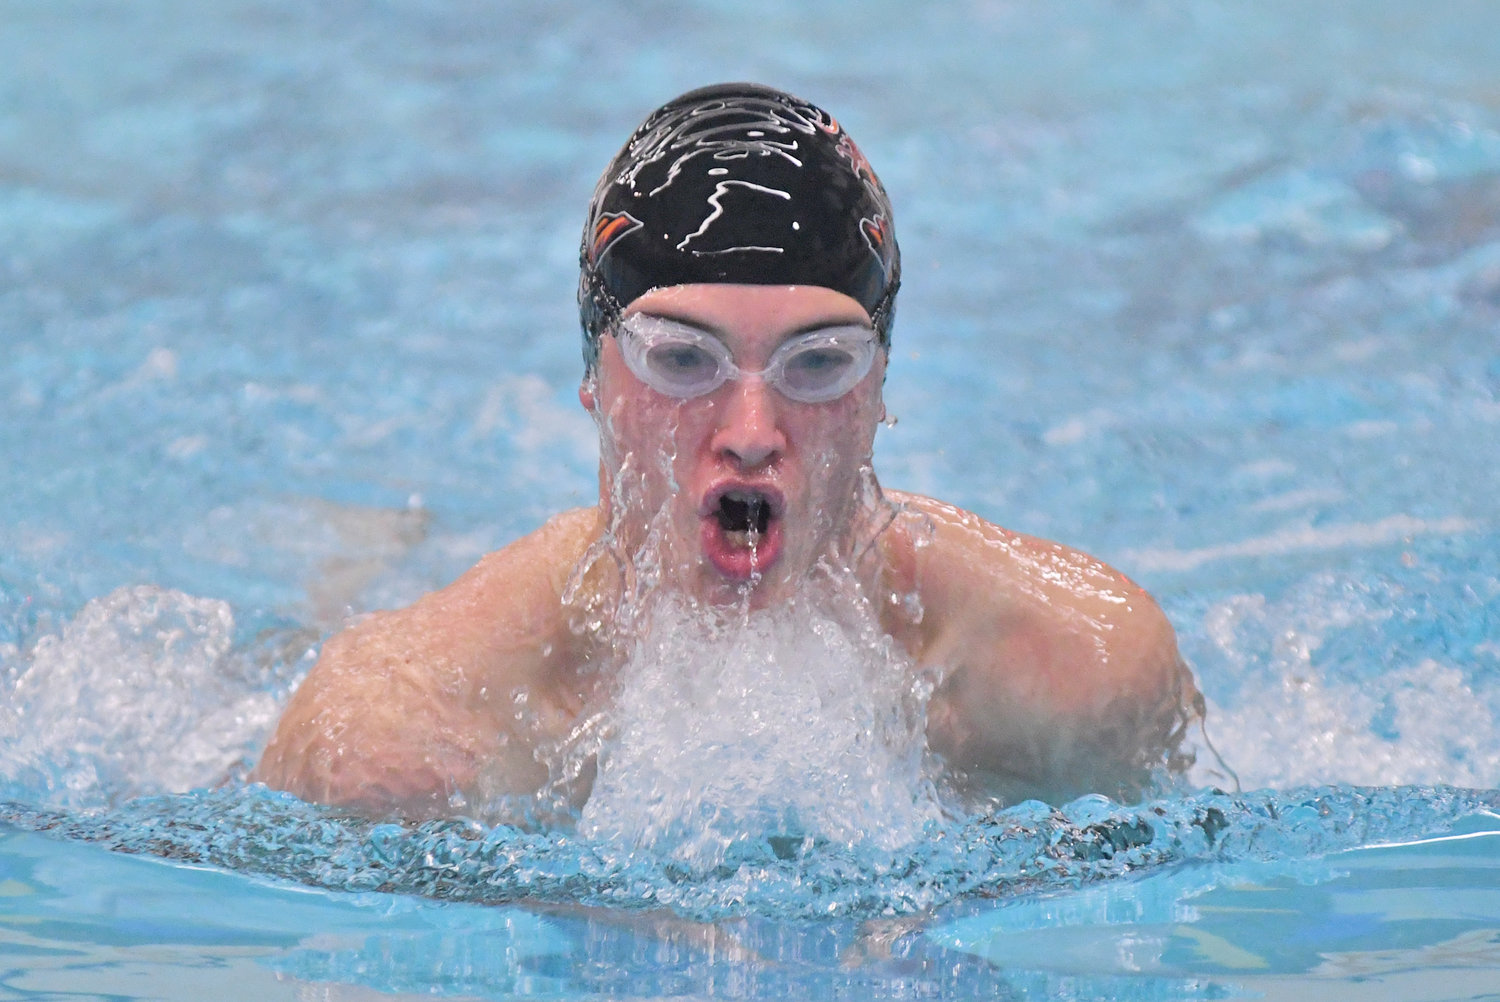 UP FOR AIR — Rome Free Academy swimmer Jack Anderegg comes up for a breath of air while competing in the breaststroke portion of the 200-yard medley relay during this Dec. 16 file photo in Holland Patent. Anderegg won the 100 butterfly in 1:09.31 against Cooperstown on Thursday.